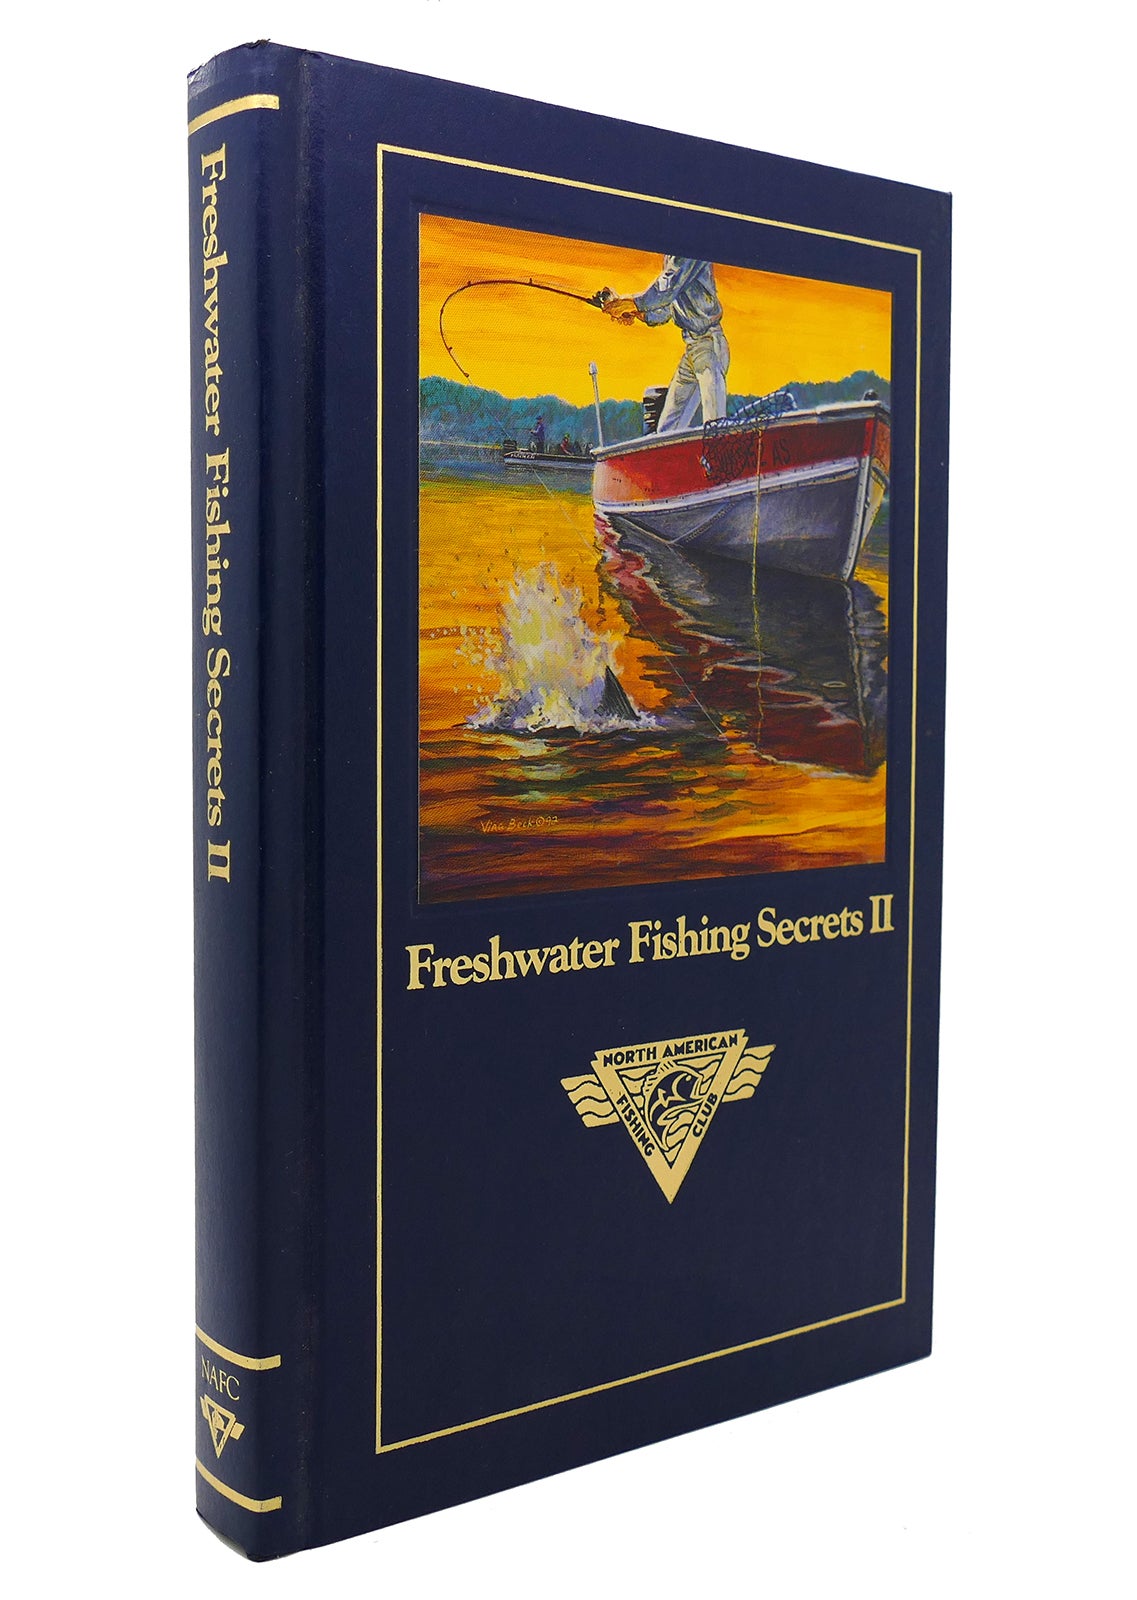 FRESHWATER FISHING SECRETS II Complete Angler's Library, North American  Fishing Club